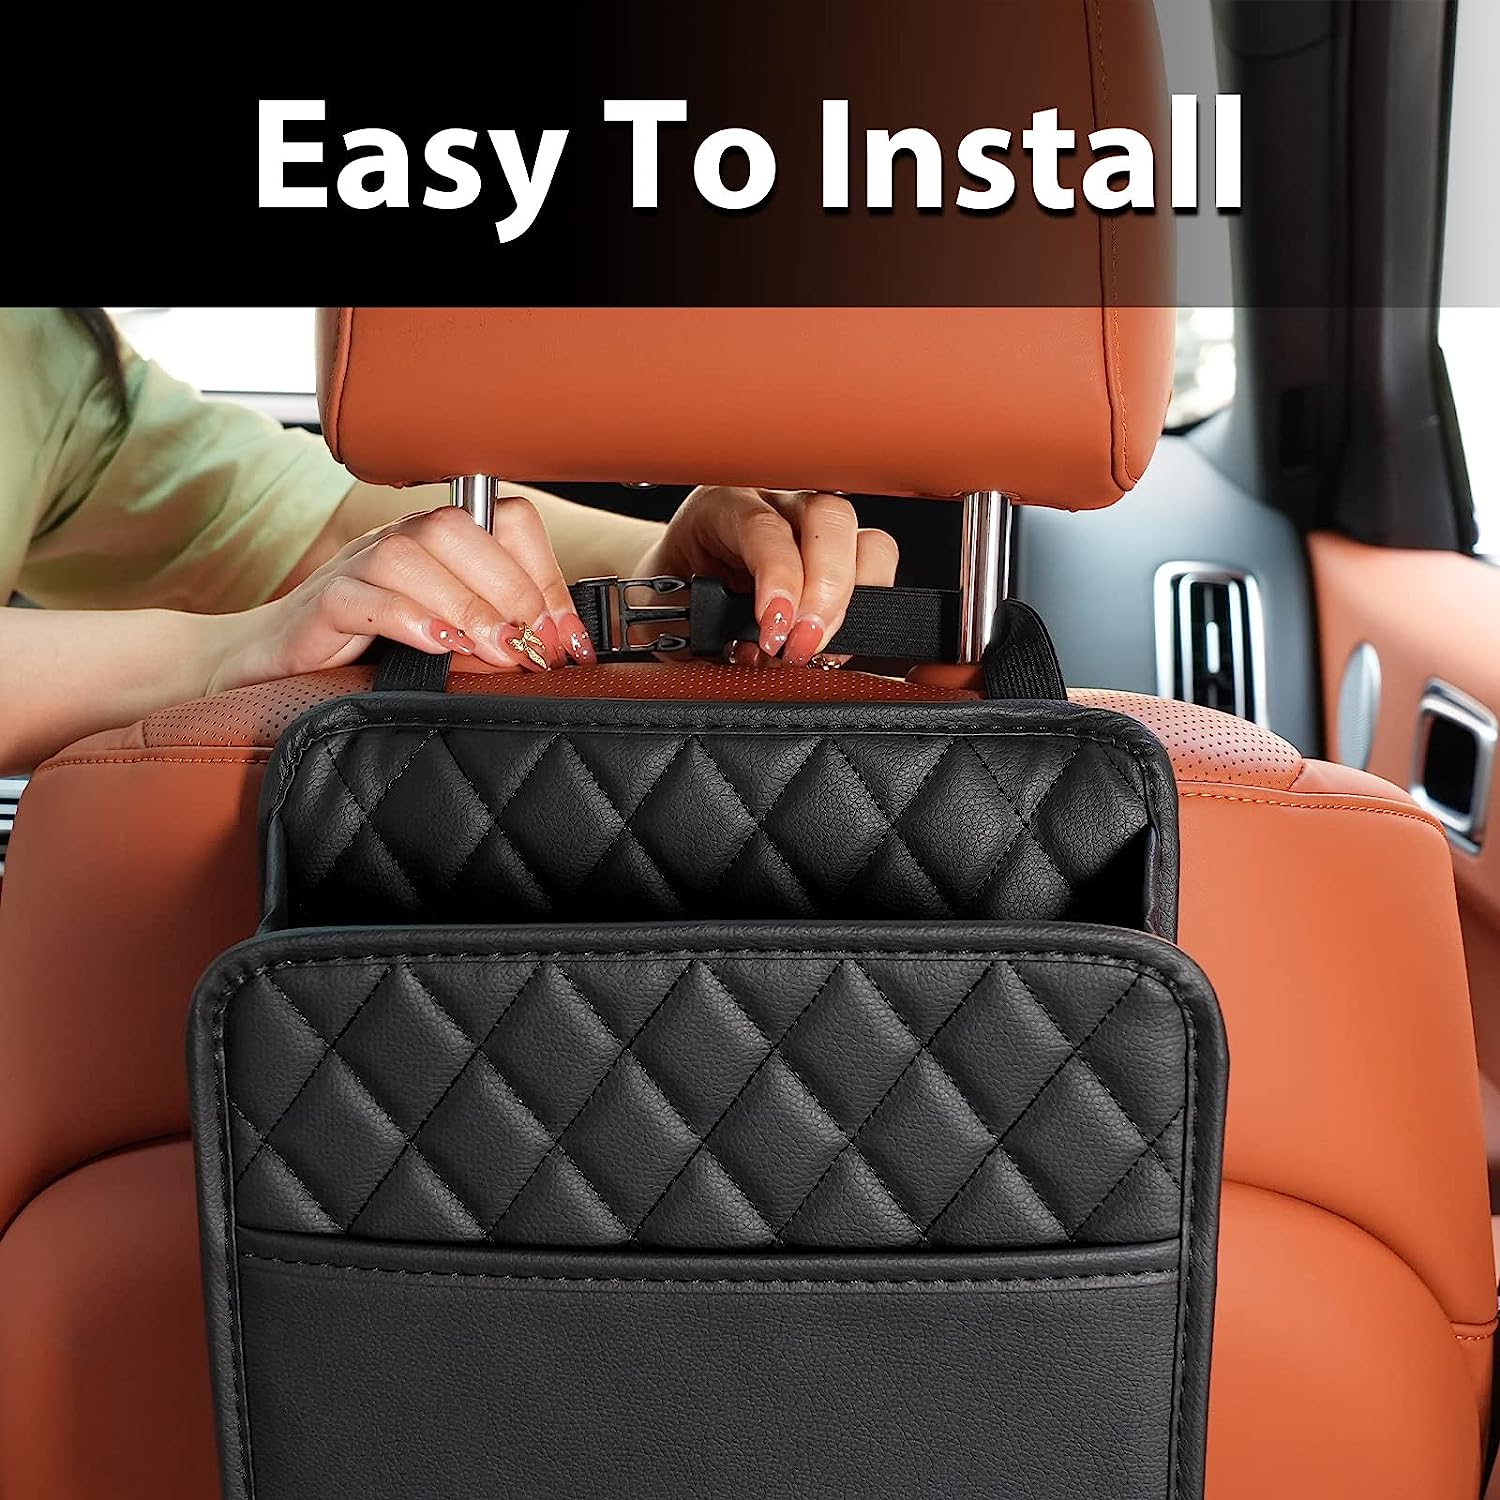 Car Organizer Between Seats, Car Organization Accessories Storage Bag  Holder for Car Front and Back Seat, Car Console Seat Organizer Storage  Pocket